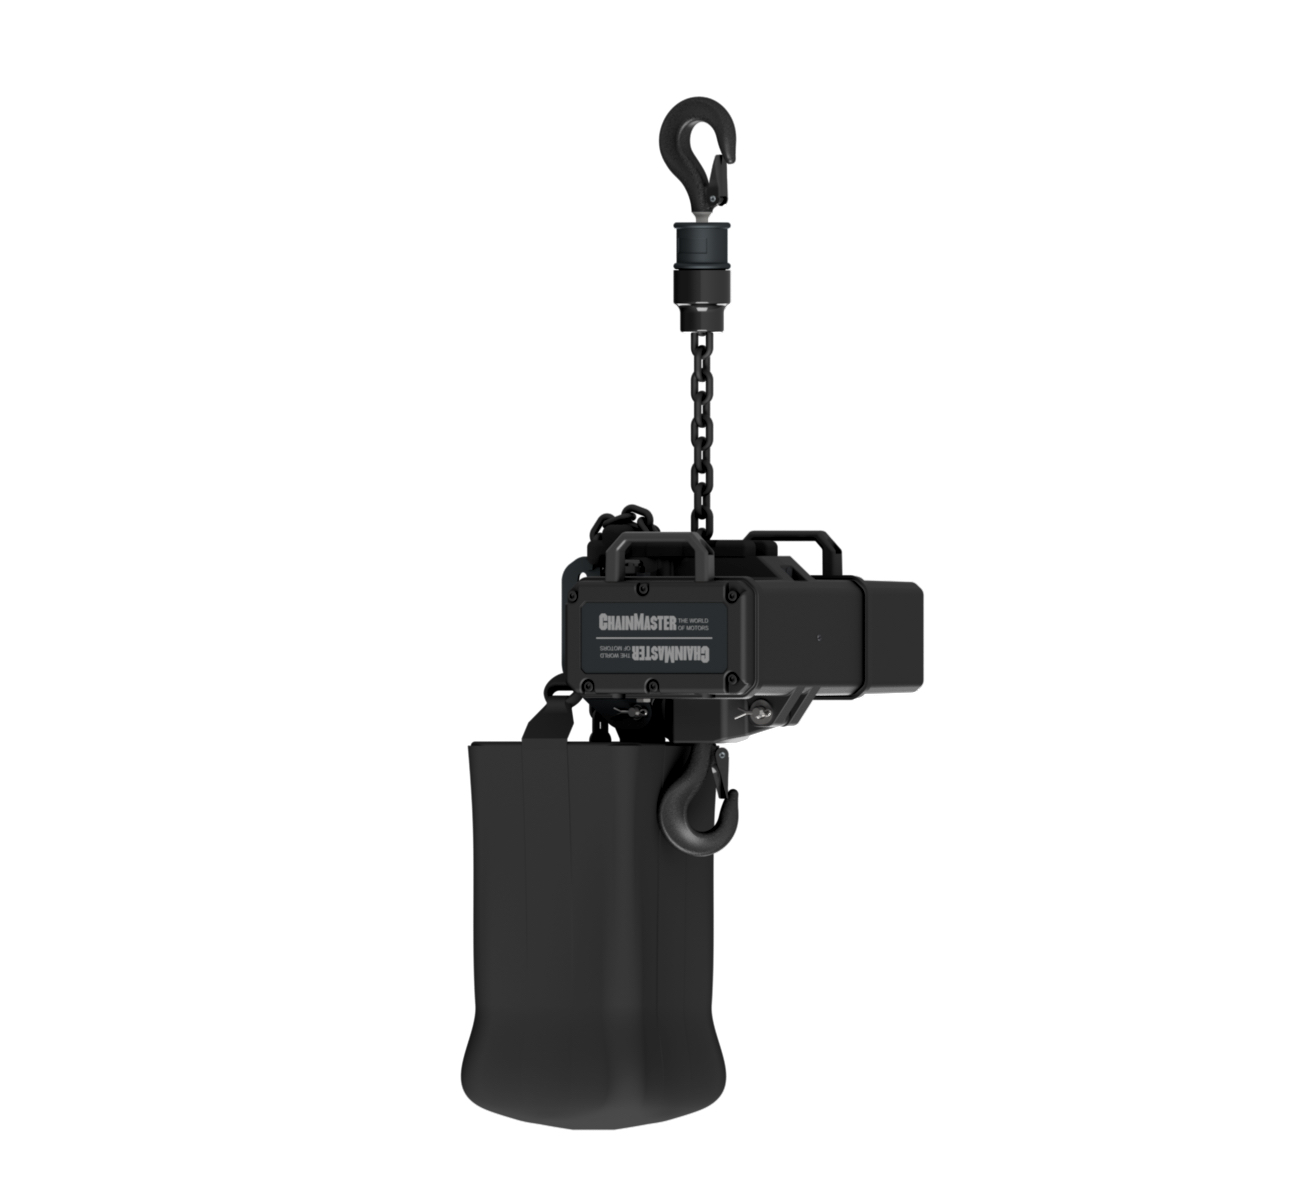 ChainMaster presents D8plus Ultra compact chain hoist